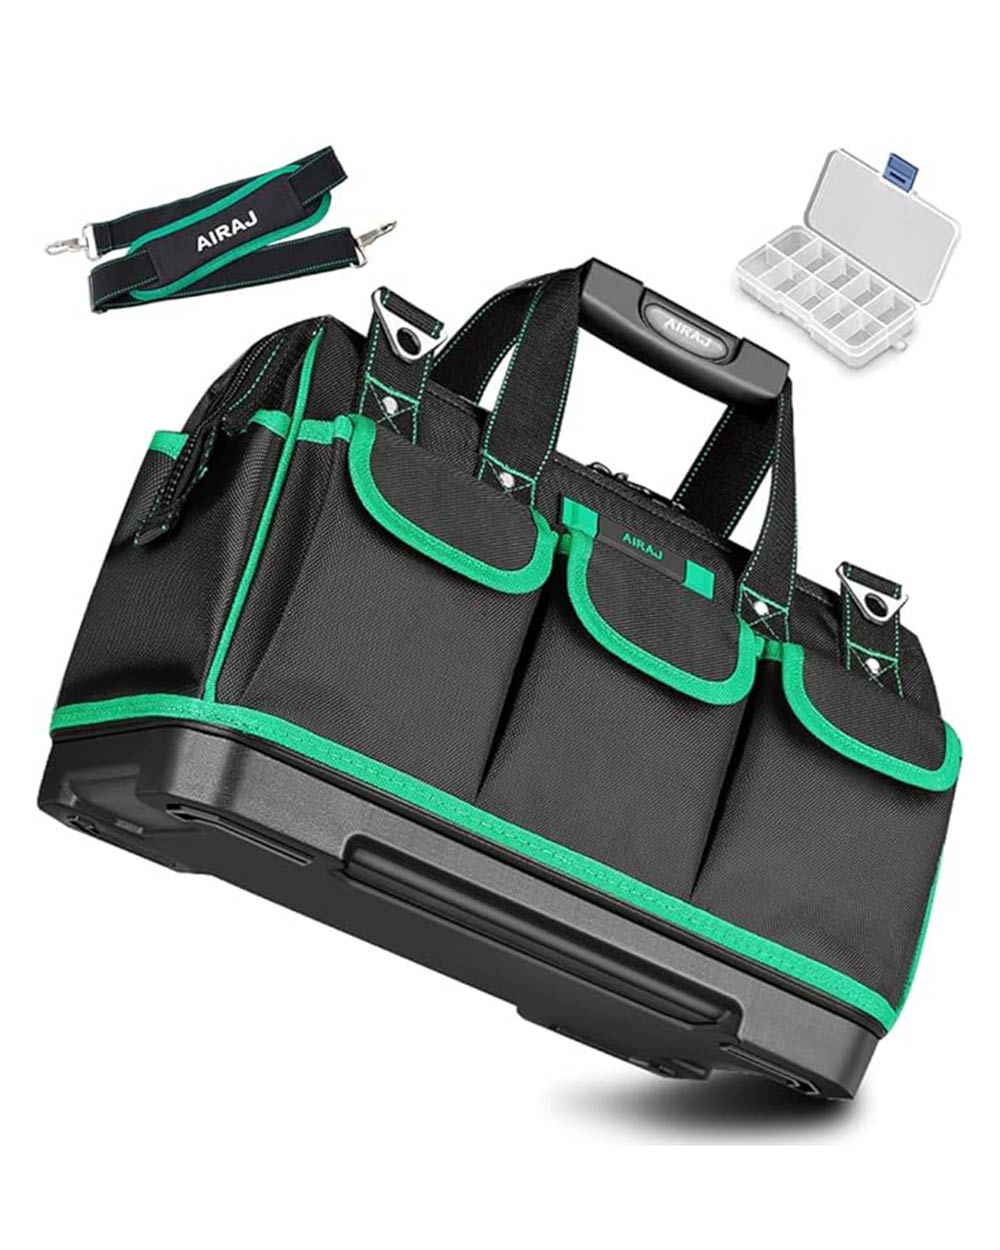 White cut out image of the tool bag.